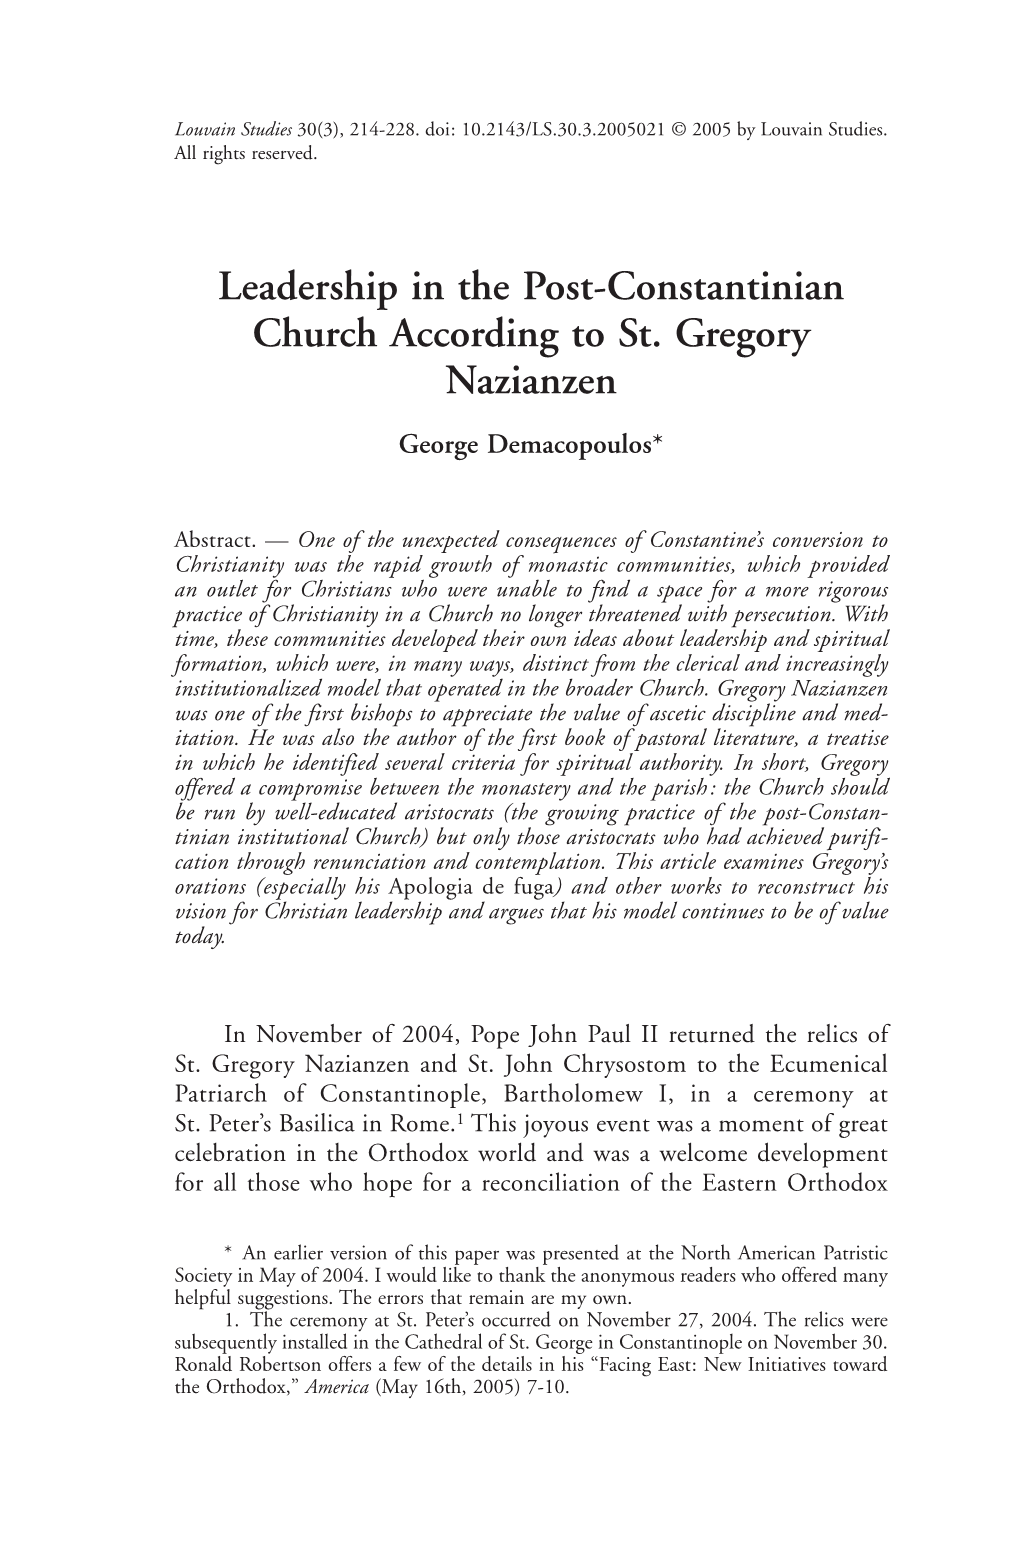 Leadership in the Post-Constantinian Church According to St. Gregory Nazianzen George Demacopoulos*